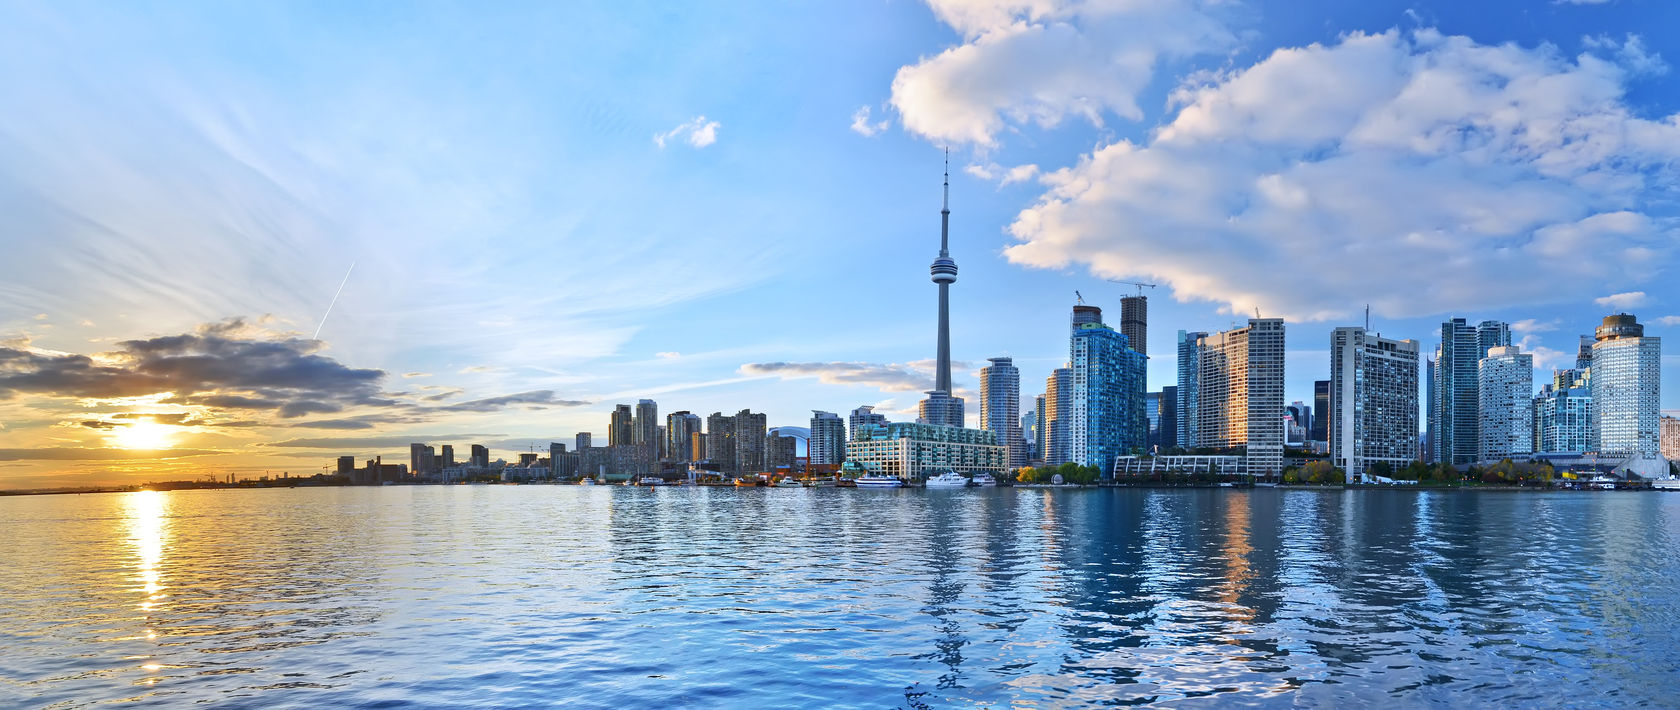 Nice Images Collection: Toronto Desktop Wallpapers